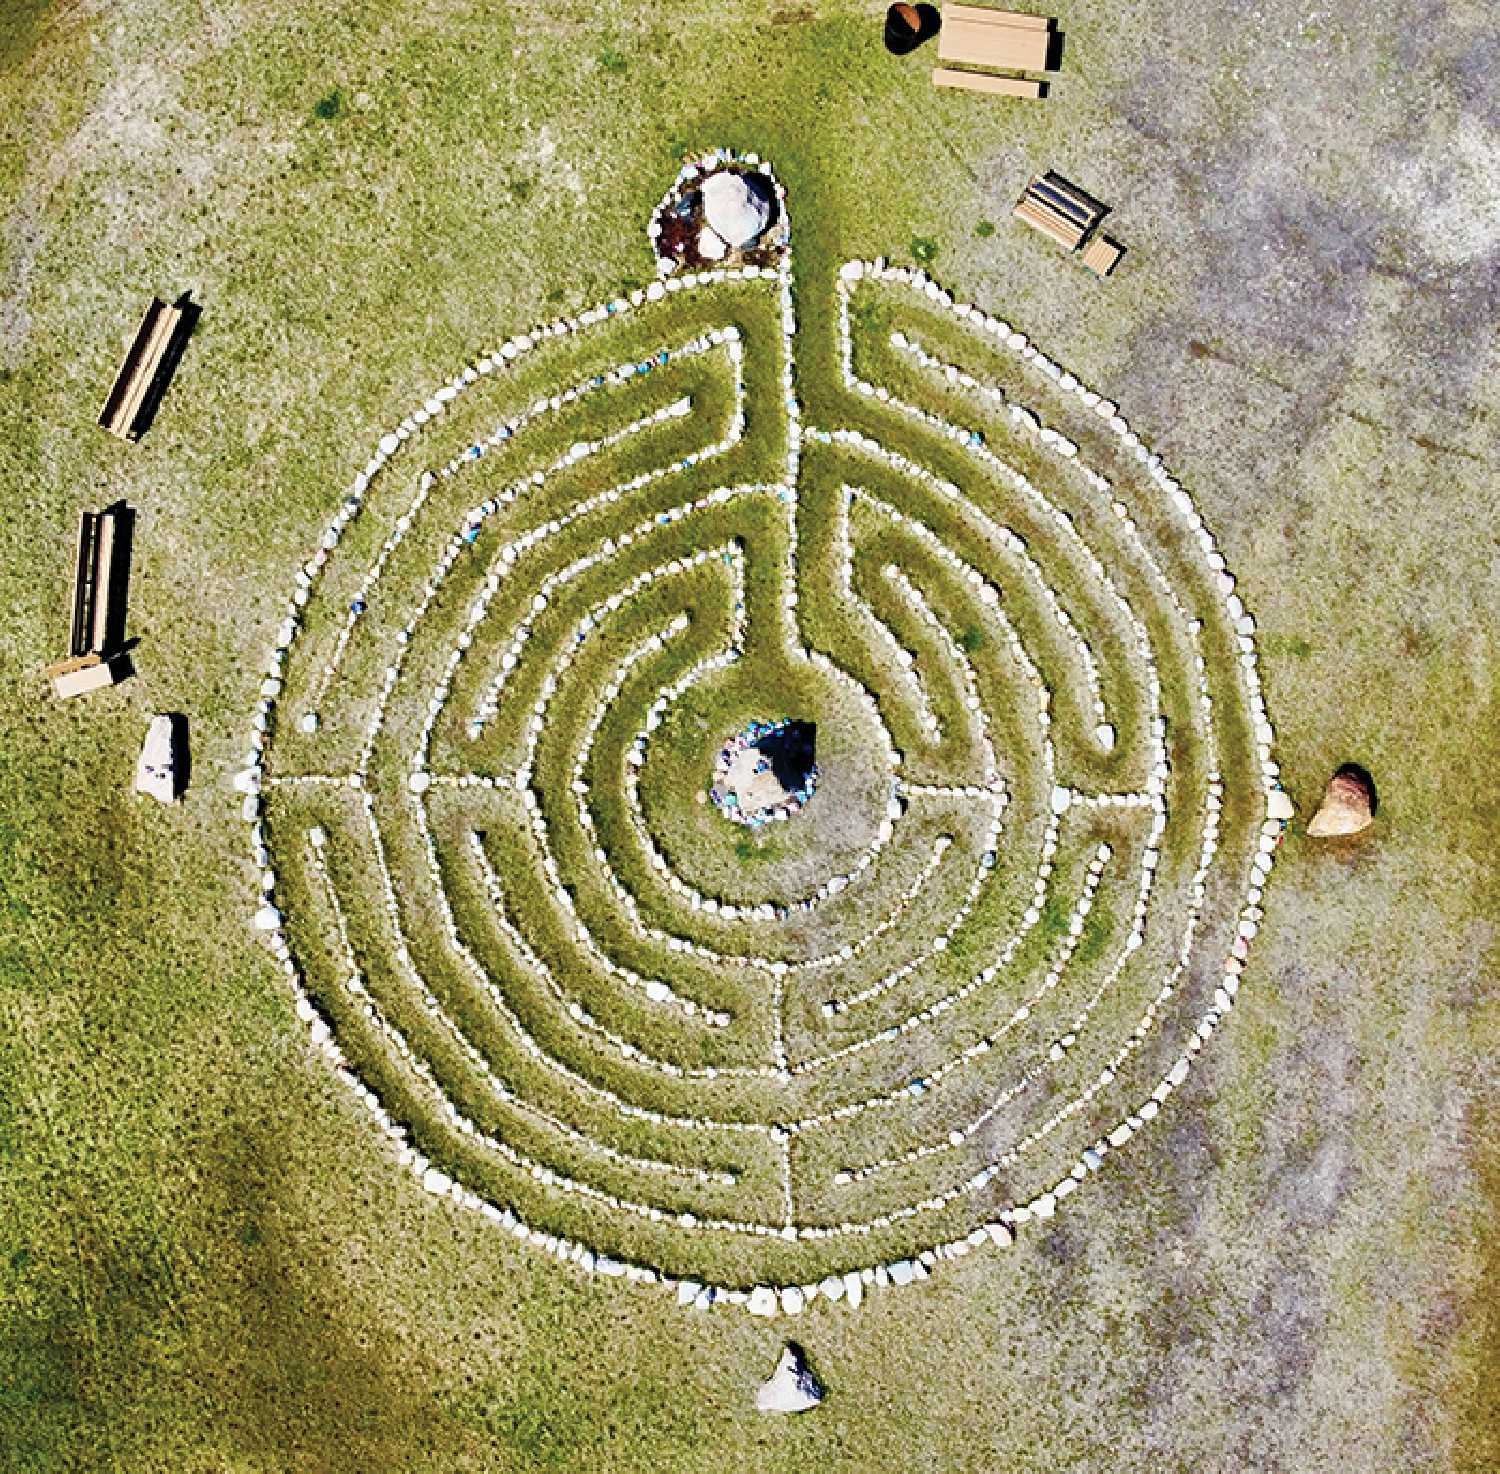 The town of Moosomin added new benches and a new picnic table at the cenotaph site, and moved the picnic table and benches that had been there to the labyrinth site at the south end of town. A proposal went to town council Wednesday for development of a park around the labyrinth.